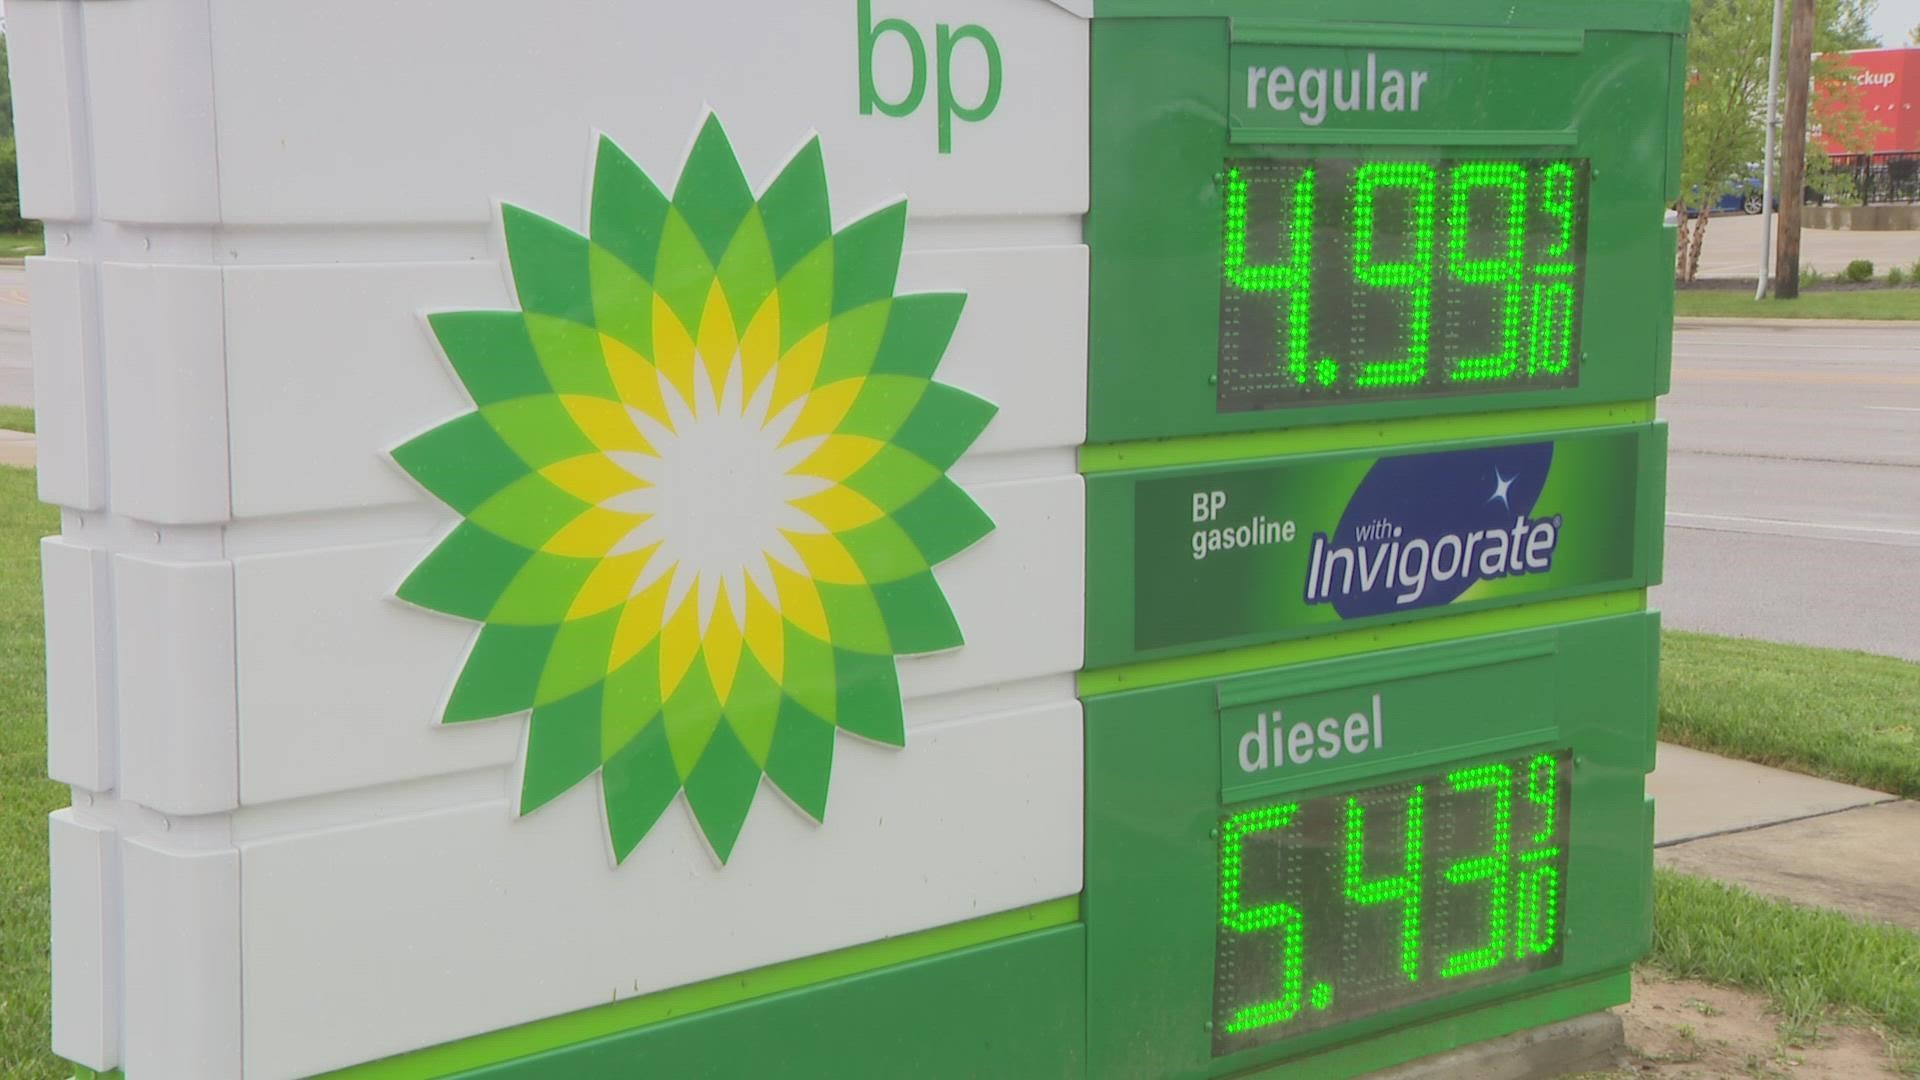 Illinois reached a milestone Thursday afternoon. The average price per gallon ticked up from $4.99 to $5.